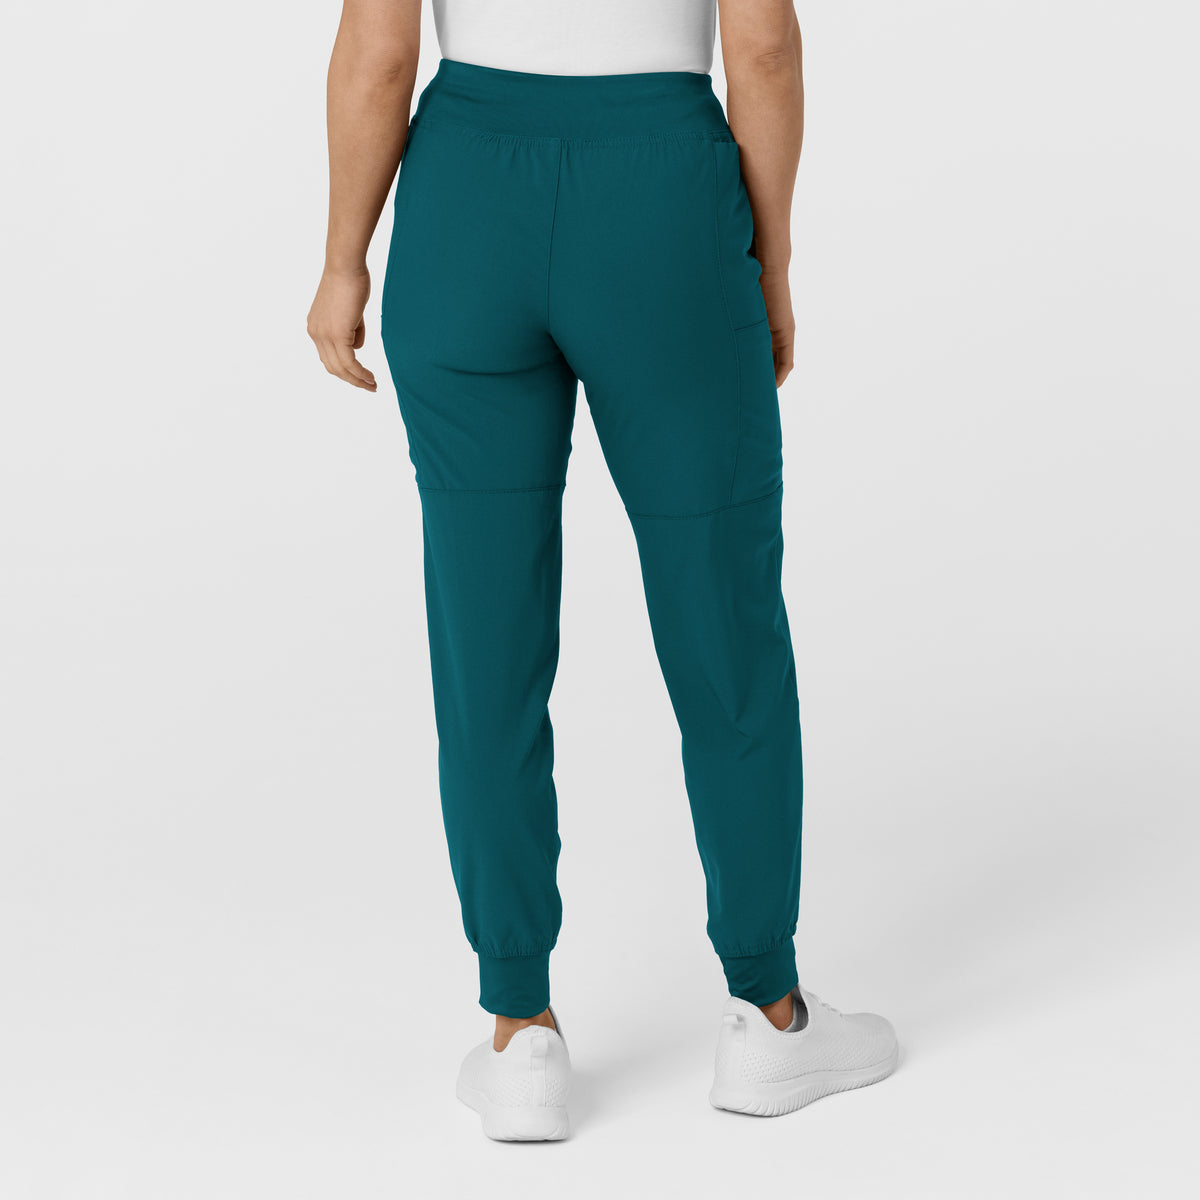 7710 Touch 7710 Women's Jogger Scrub Pants by Med Couture